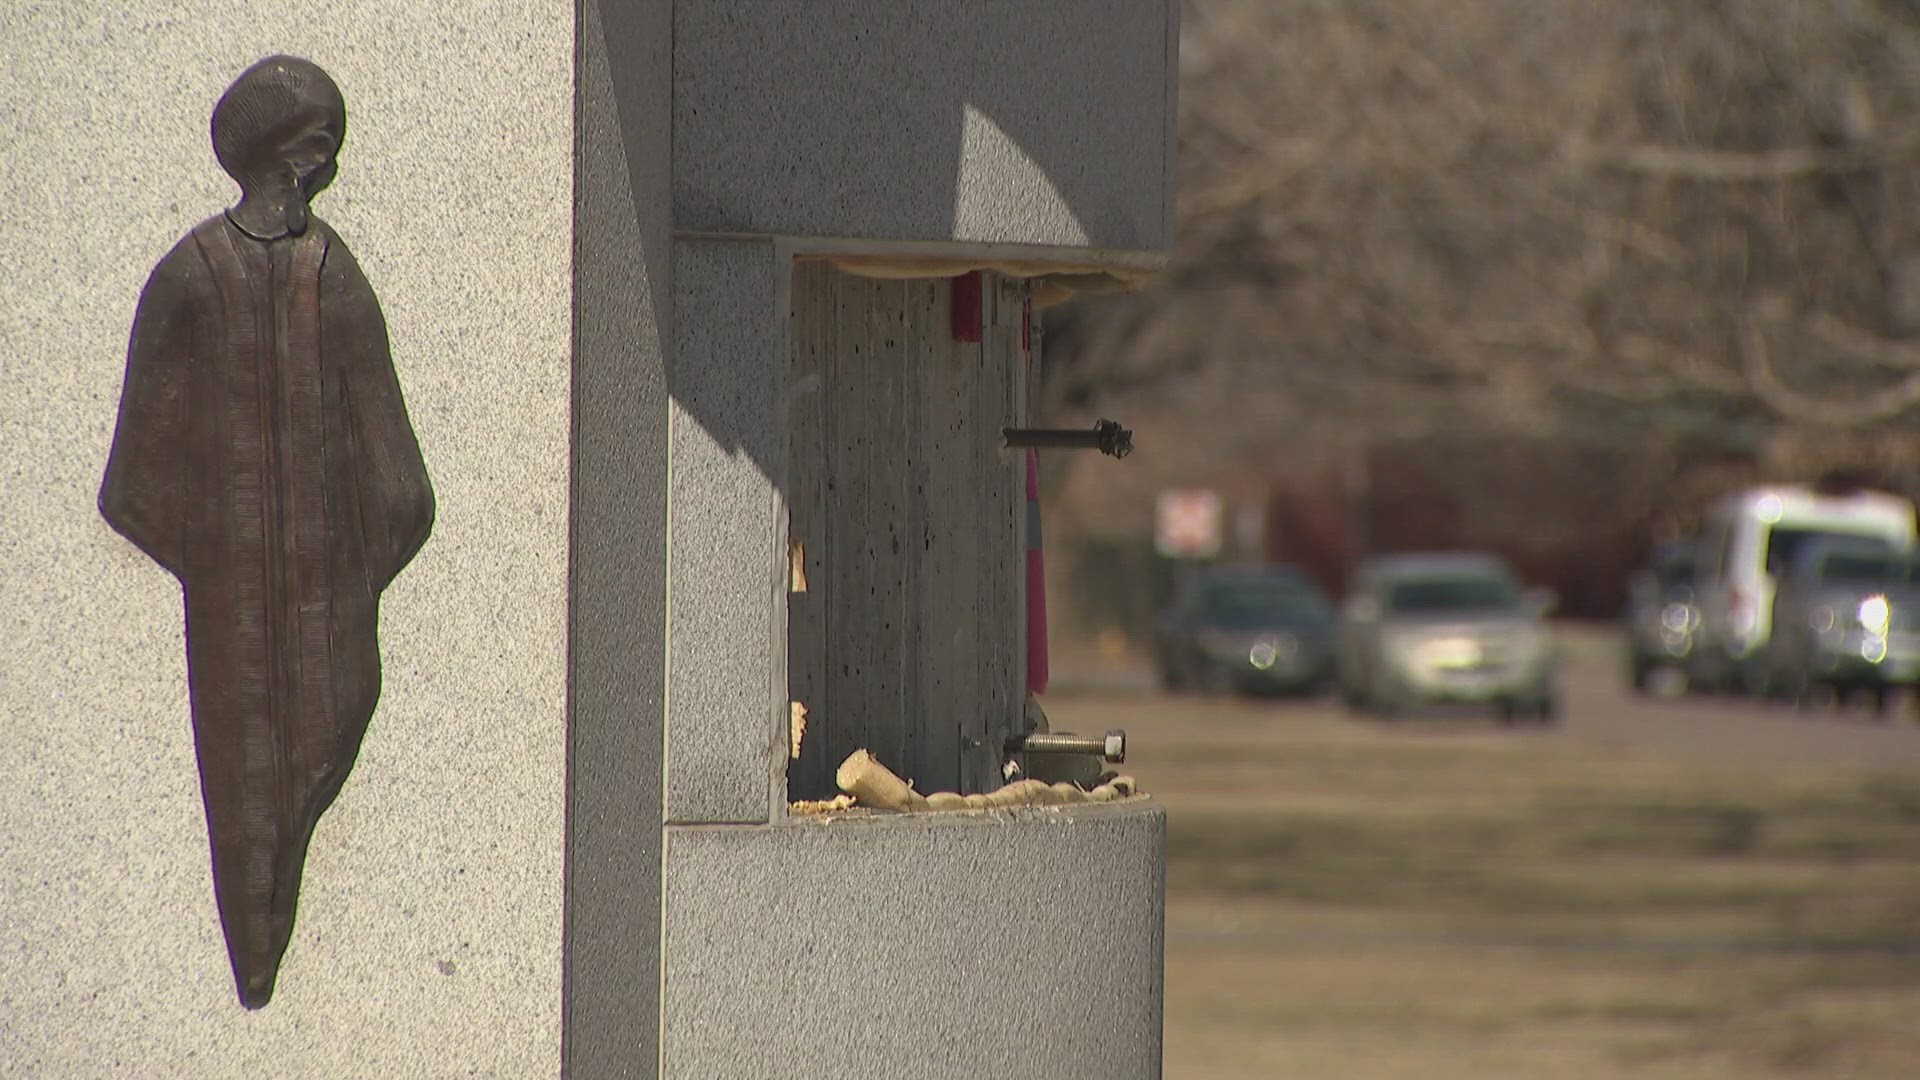 Denver police said they have opened an investigation into the vandalism.